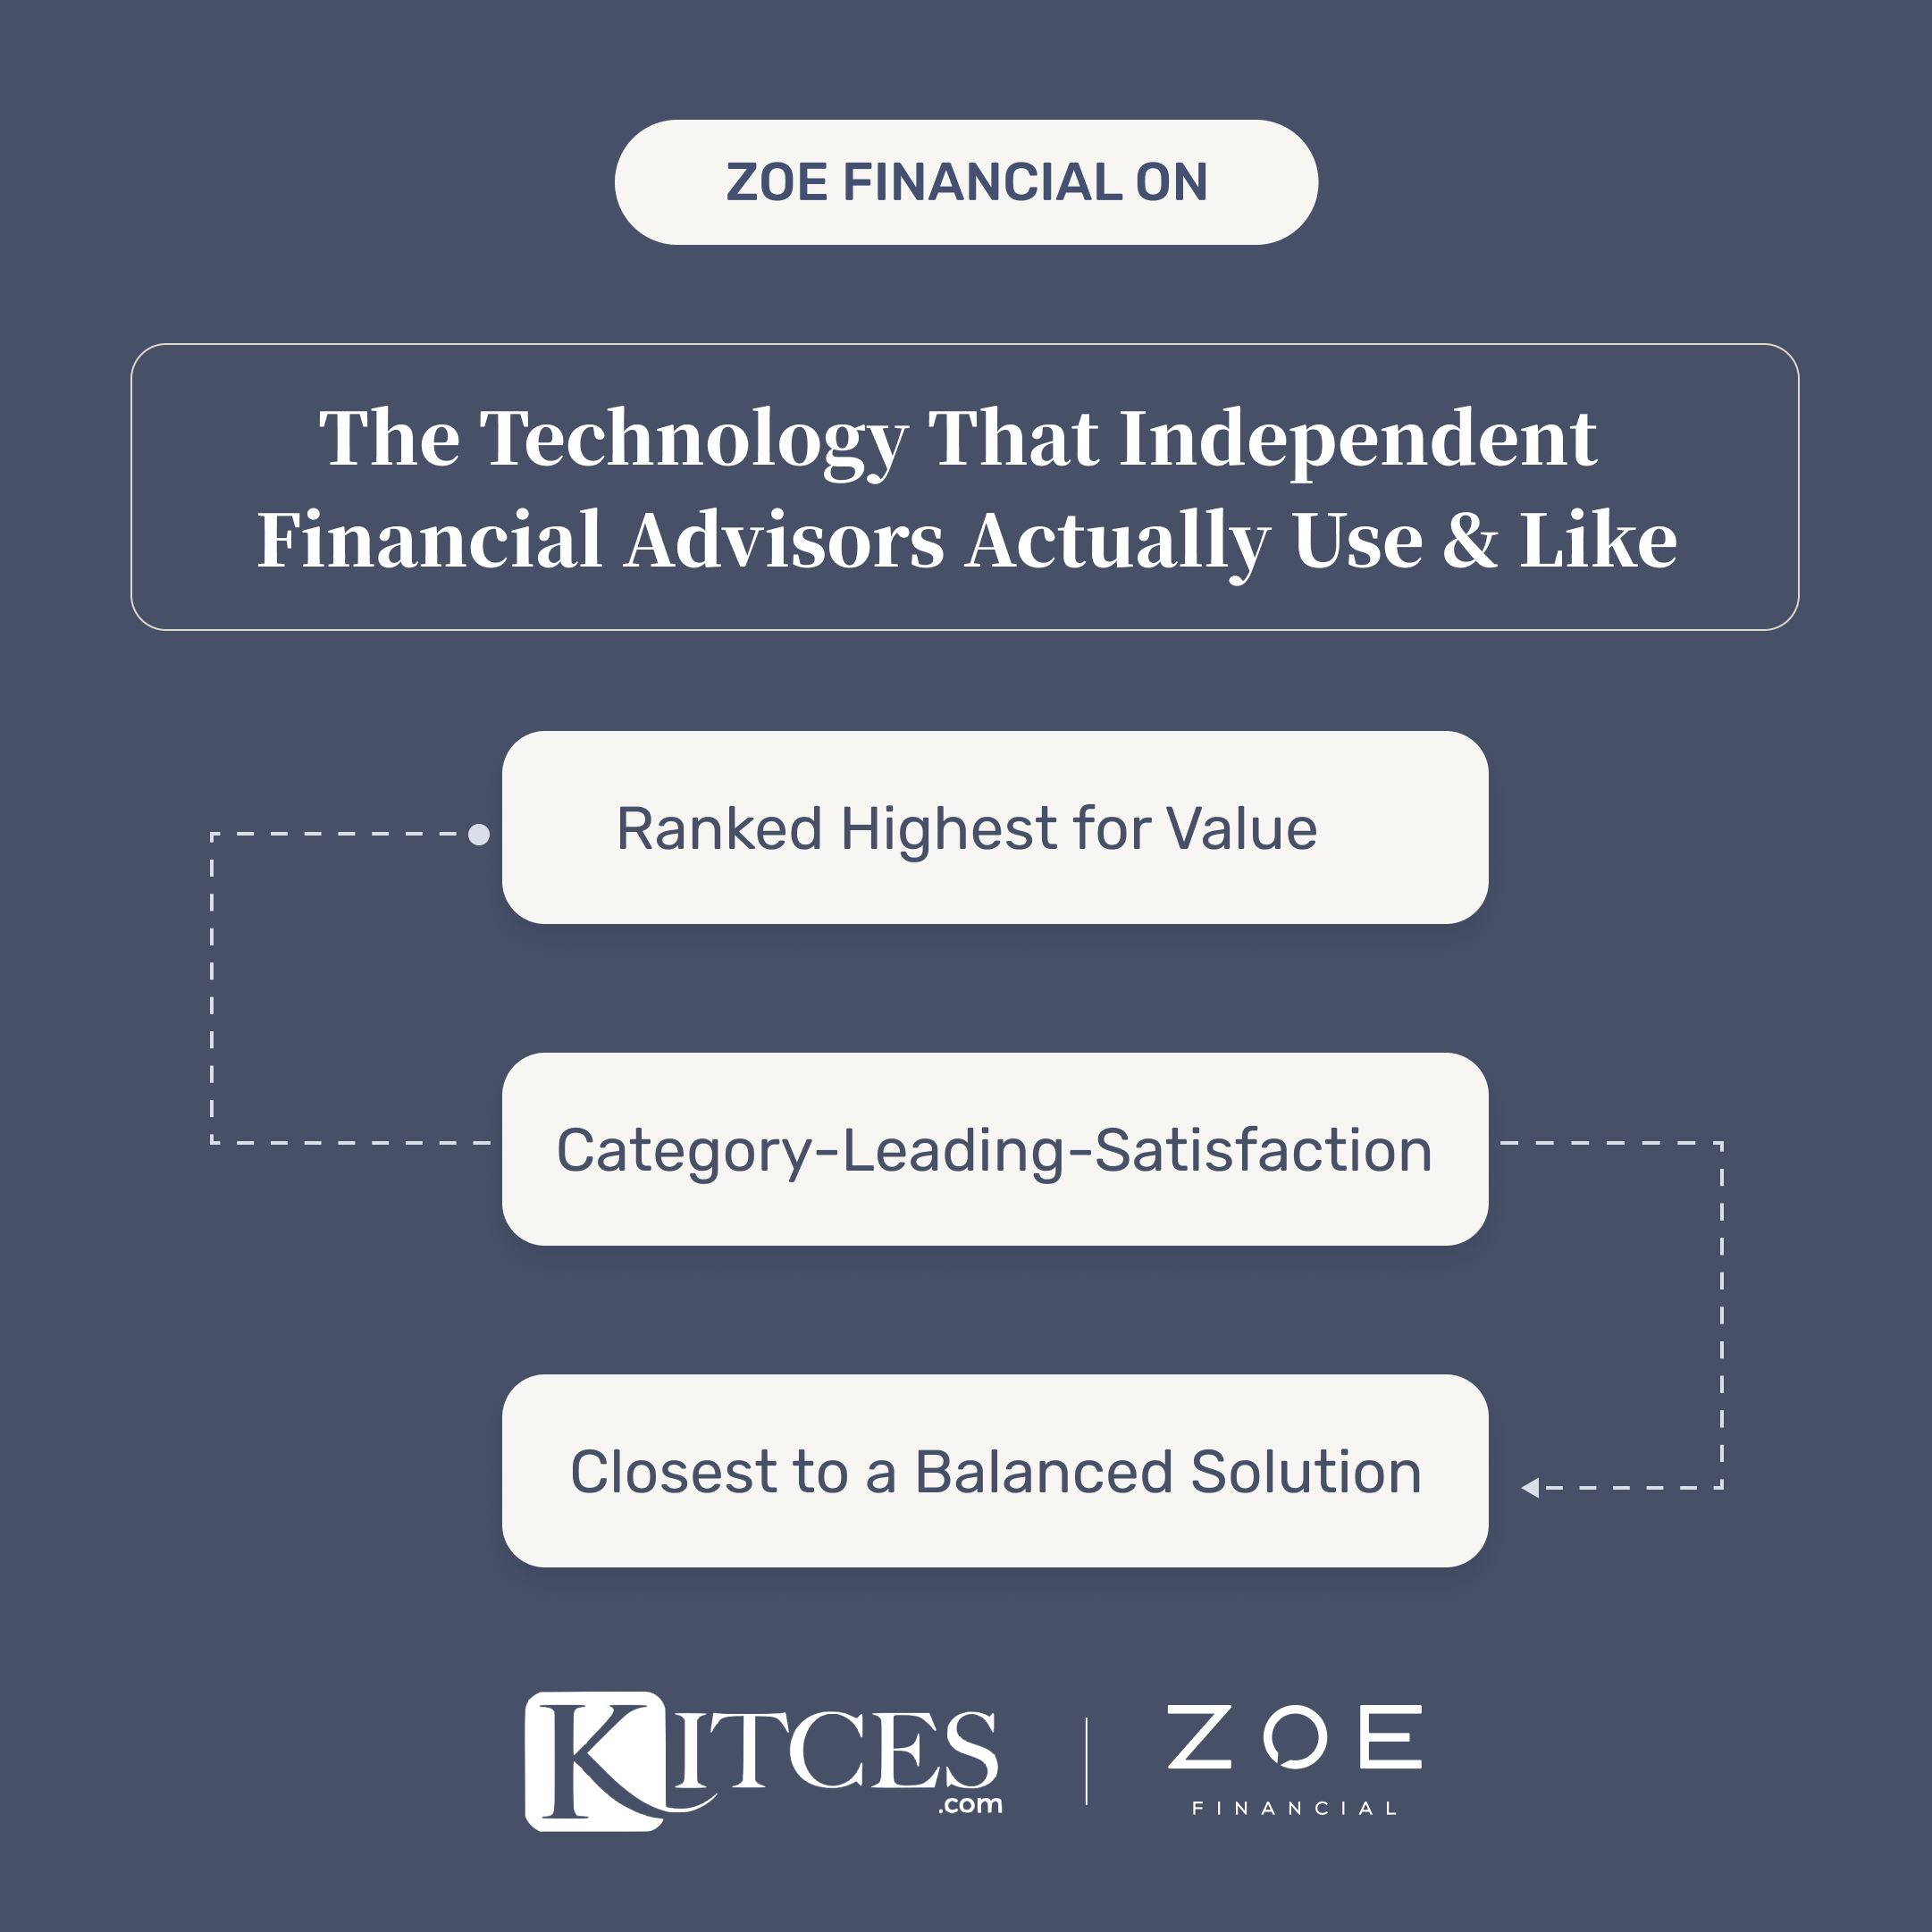 https://www.kitces.com/wp-content/uploads/2023/08/The-Kitces-Report-The-Technology-That-Independent-Financial-Advisors-Actually-Use-And-Like-Vol-1-2023-3.pdf